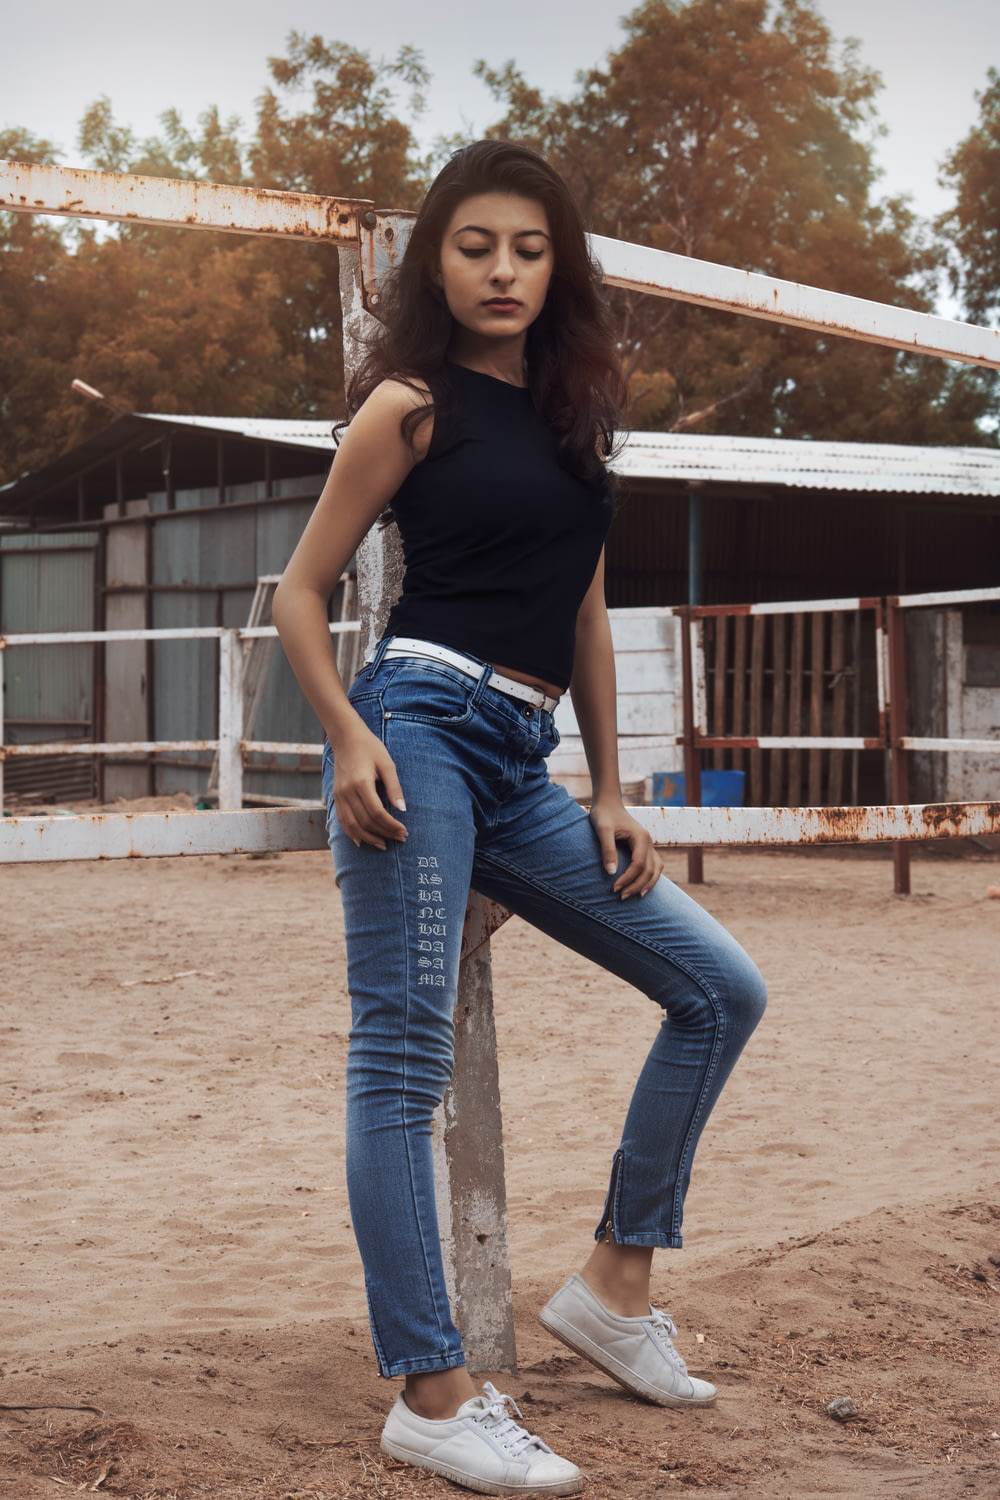 woman in black tank top and blue denim jeans standing on brown sand during daytime